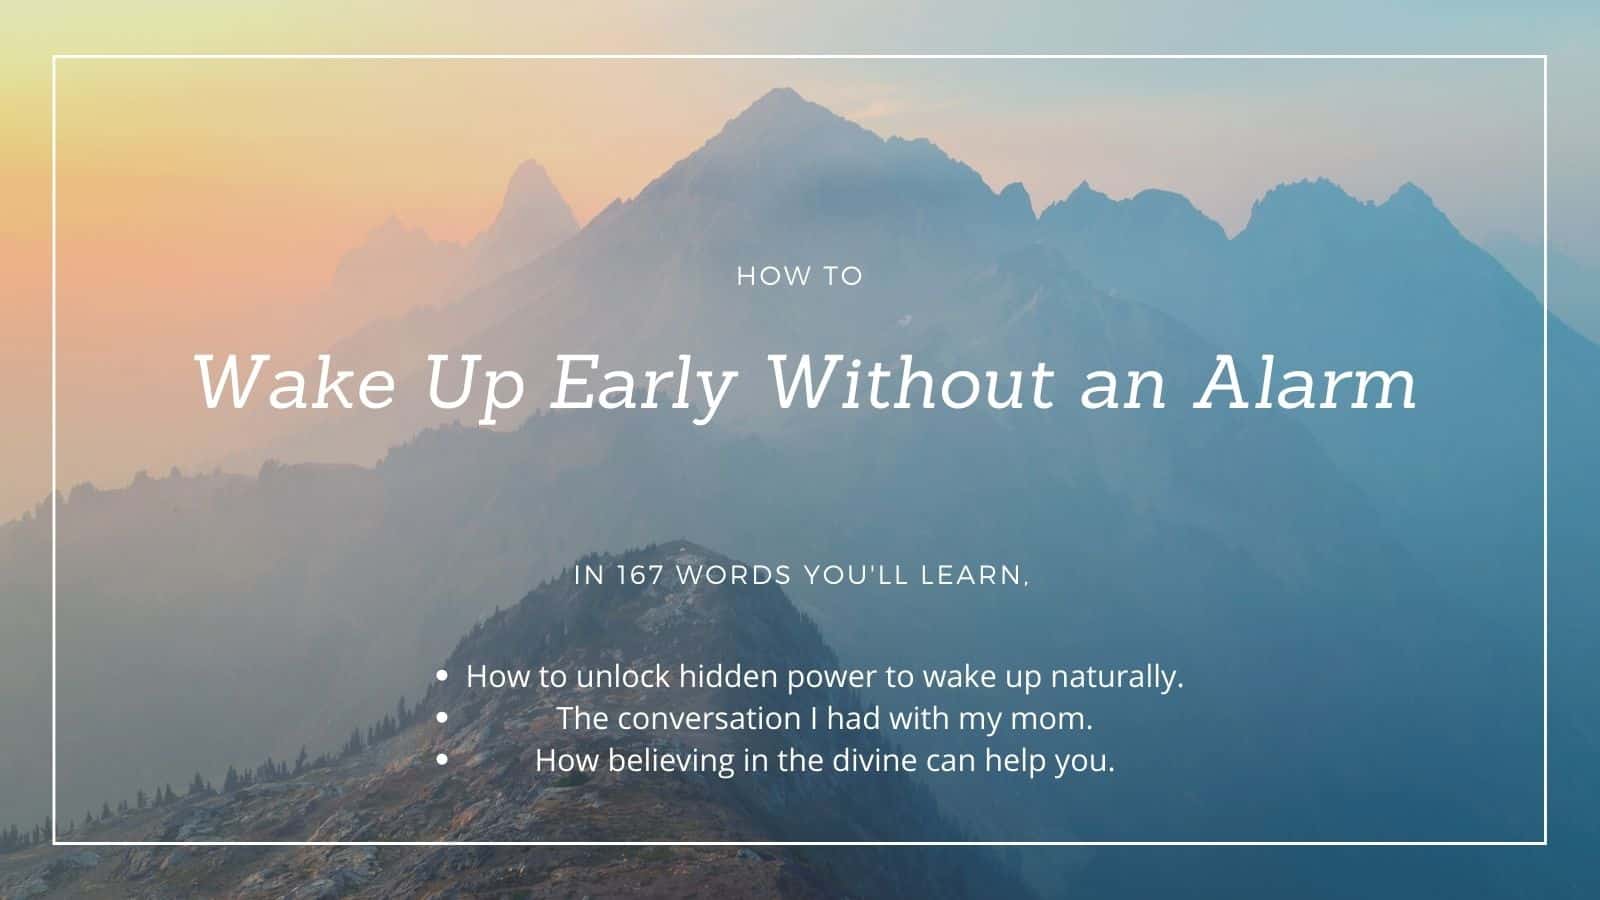 The Natural Wake-Up Call! How To Wake Up Early Without an Alarm